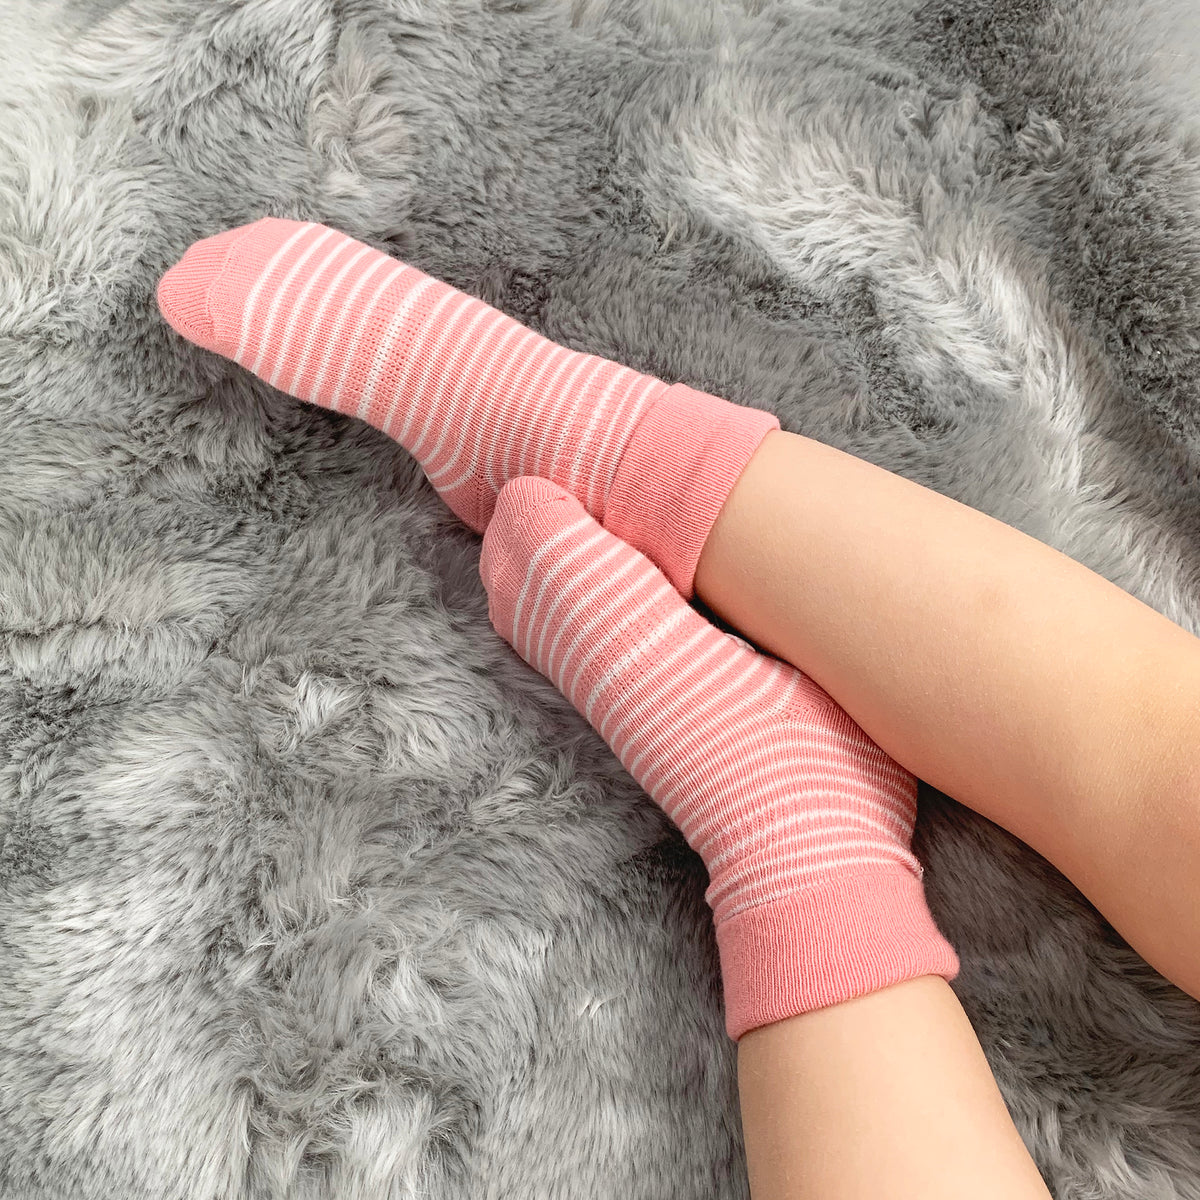 Non-Slip Stay On Baby and Toddler Socks - 3 Pack in Fairy Tale Pink, Pink Animal  & Peachy stripe